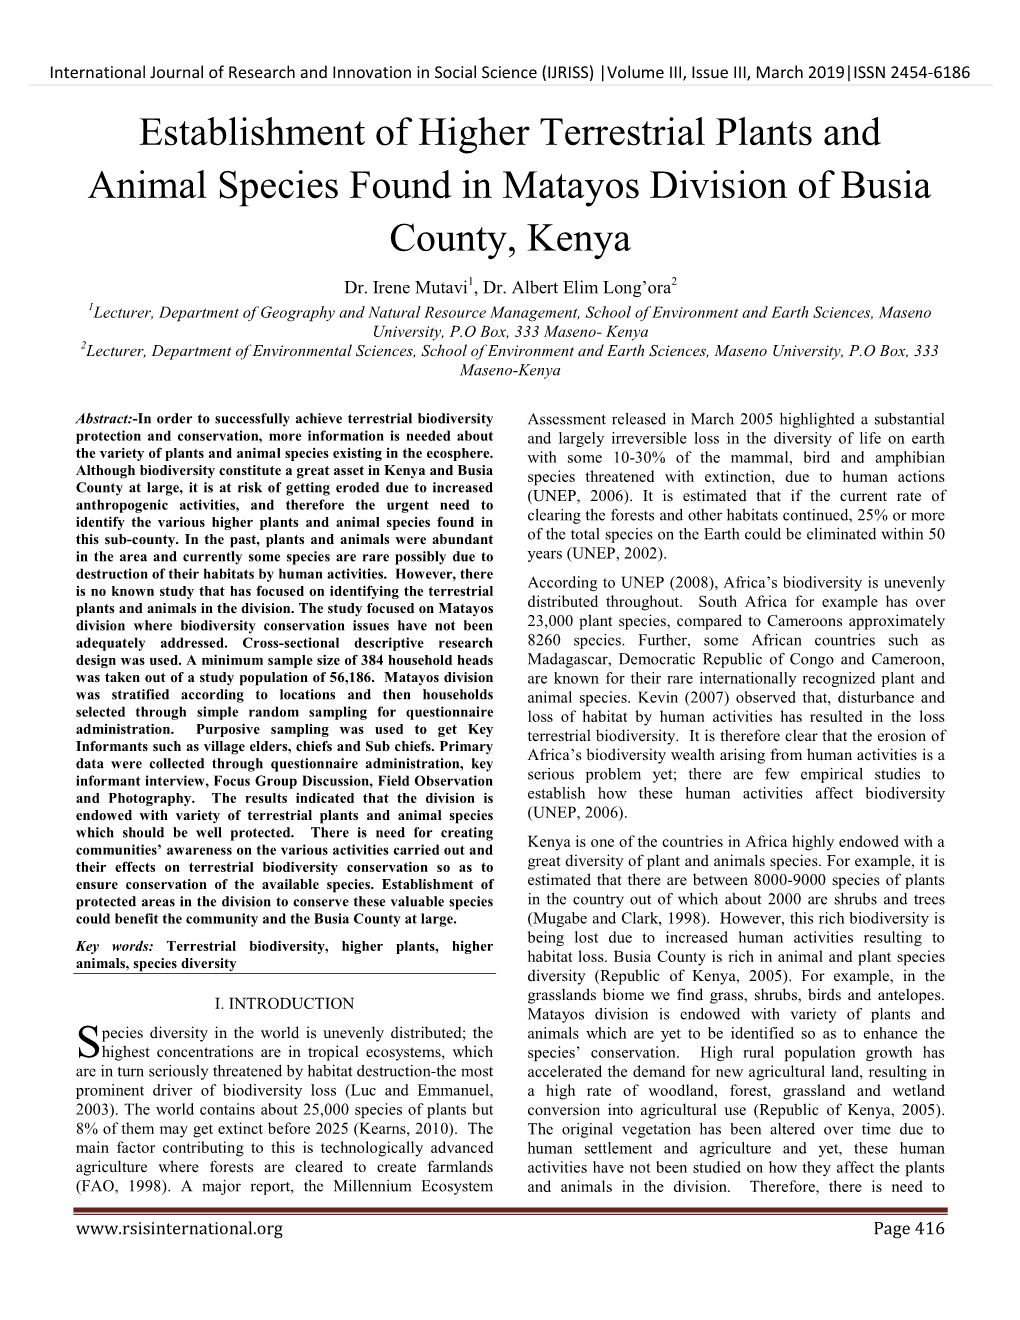 Establishment of Higher Terrestrial Plants and Animal Species Found in Matayos Division of Busia County, Kenya